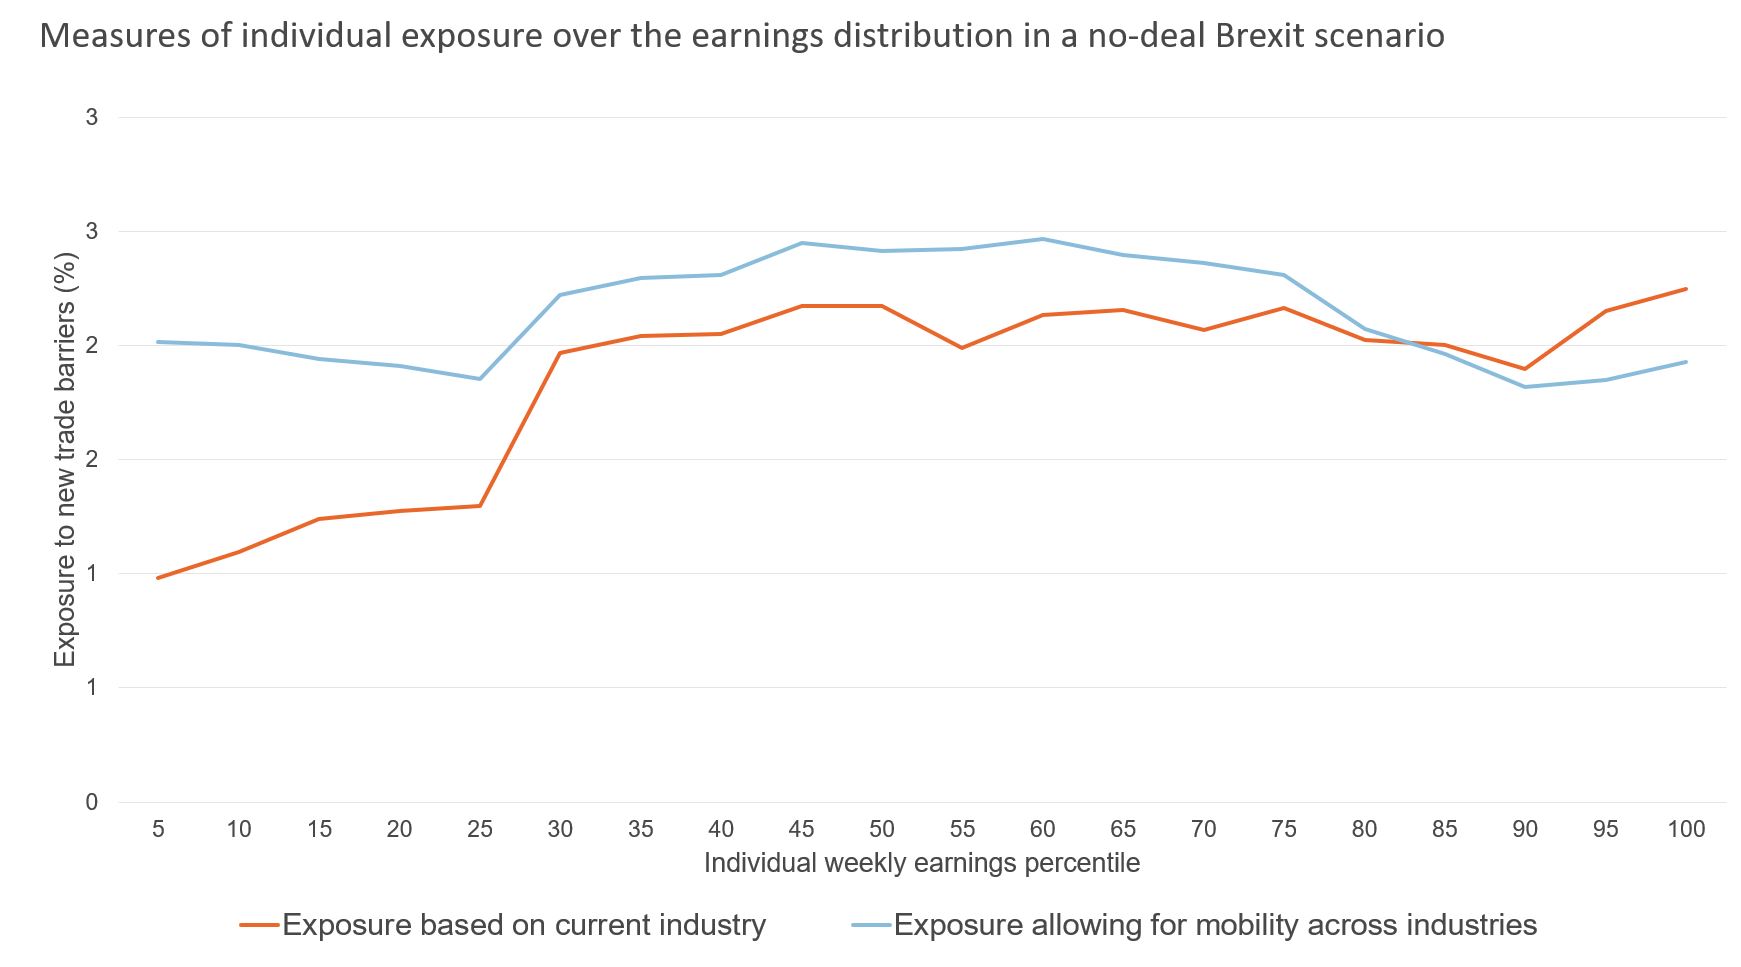 Figure showing measures of individual exposure over the earnings distribution in no-deal Brexit